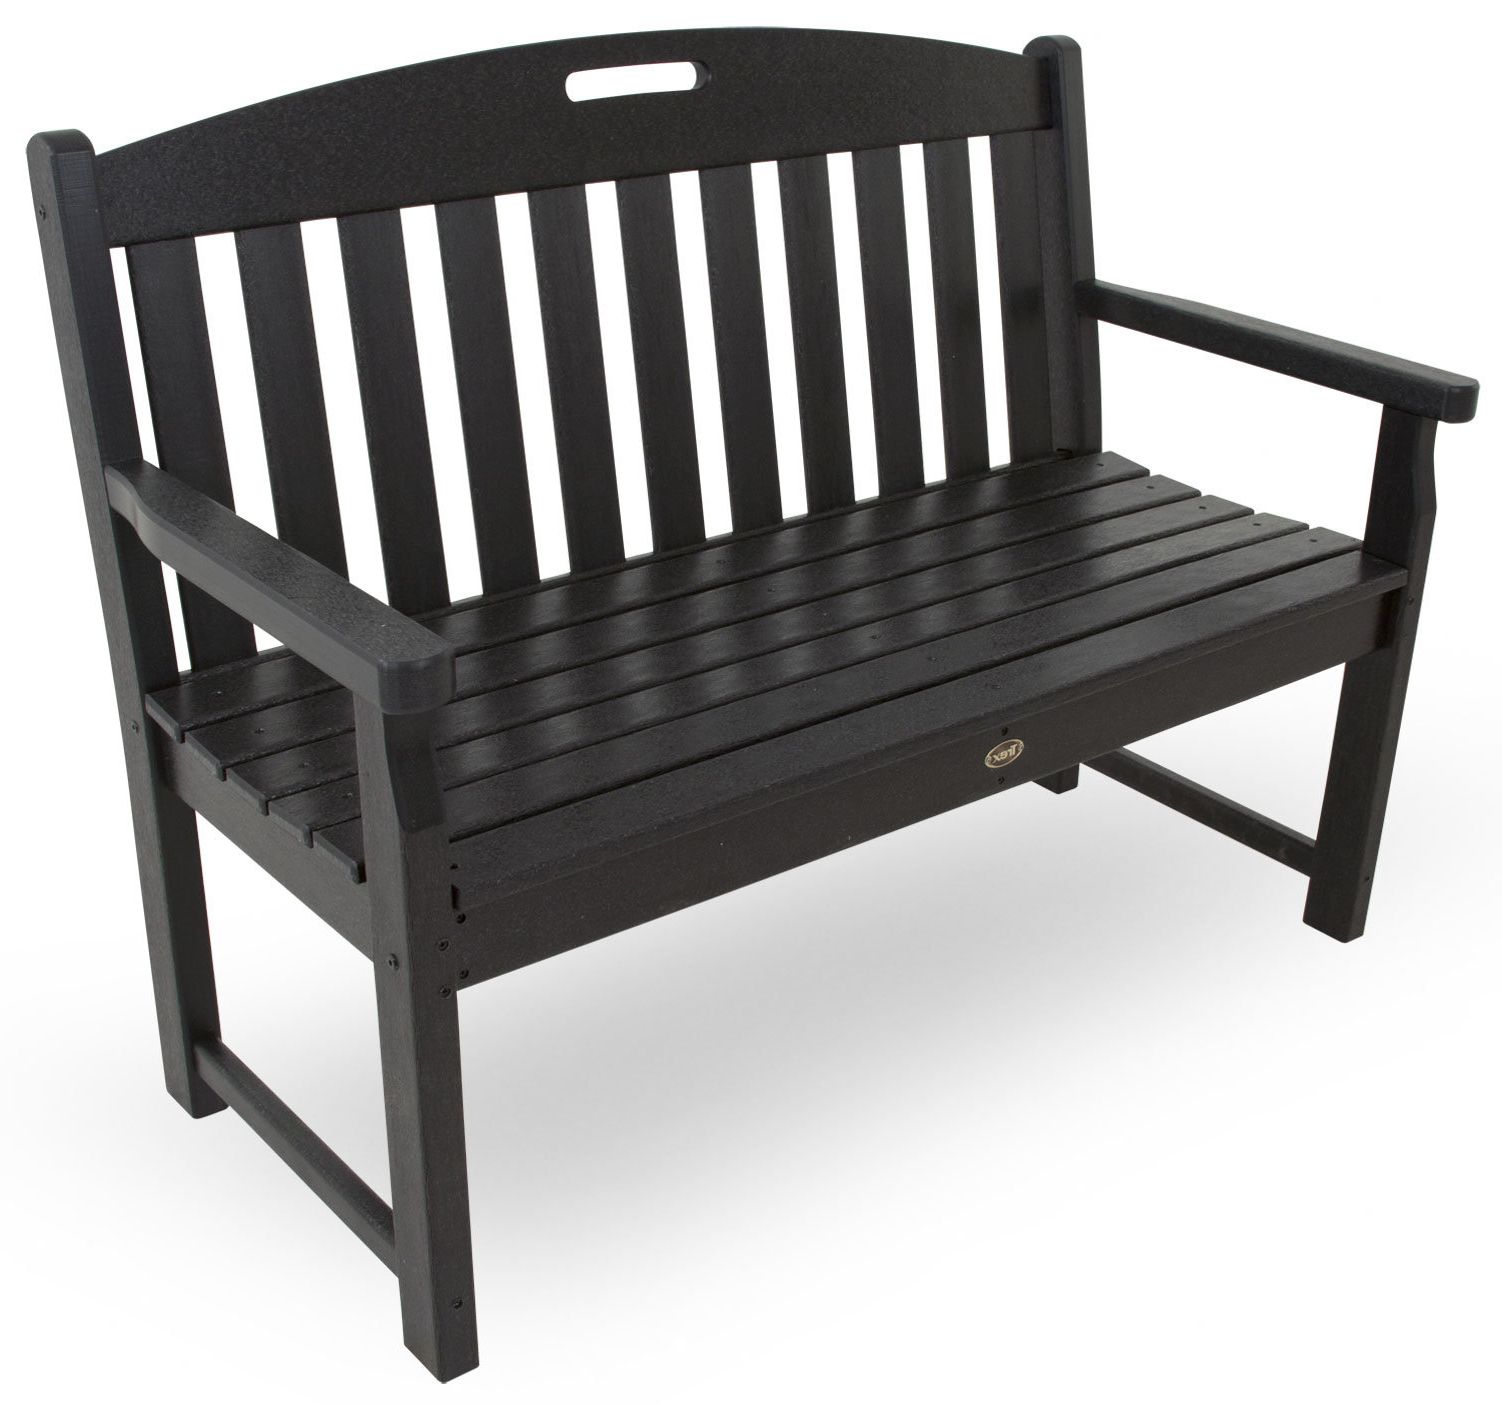 Wayfair In Fashionable Bence Plastic Outdoor Garden Benches (View 13 of 25)